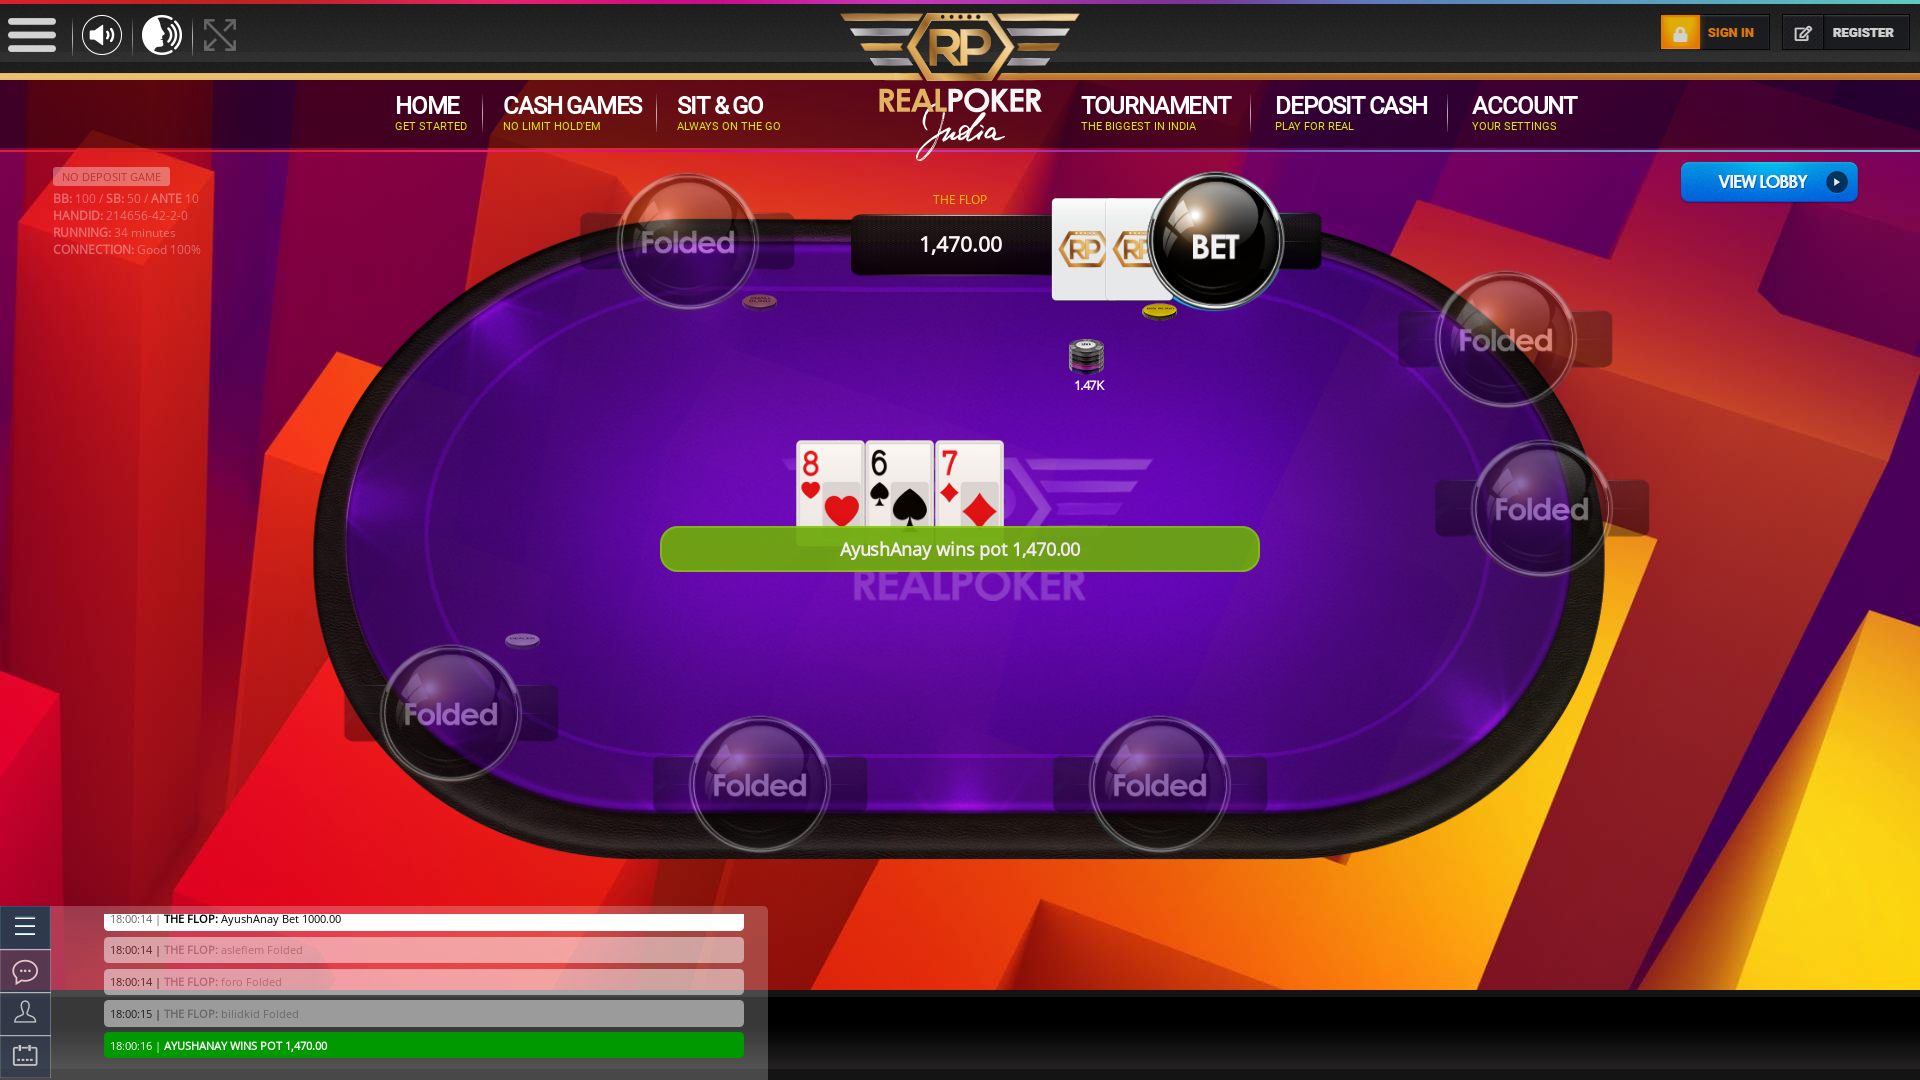 Online poker on a 10 player table in the 33rd minute match up